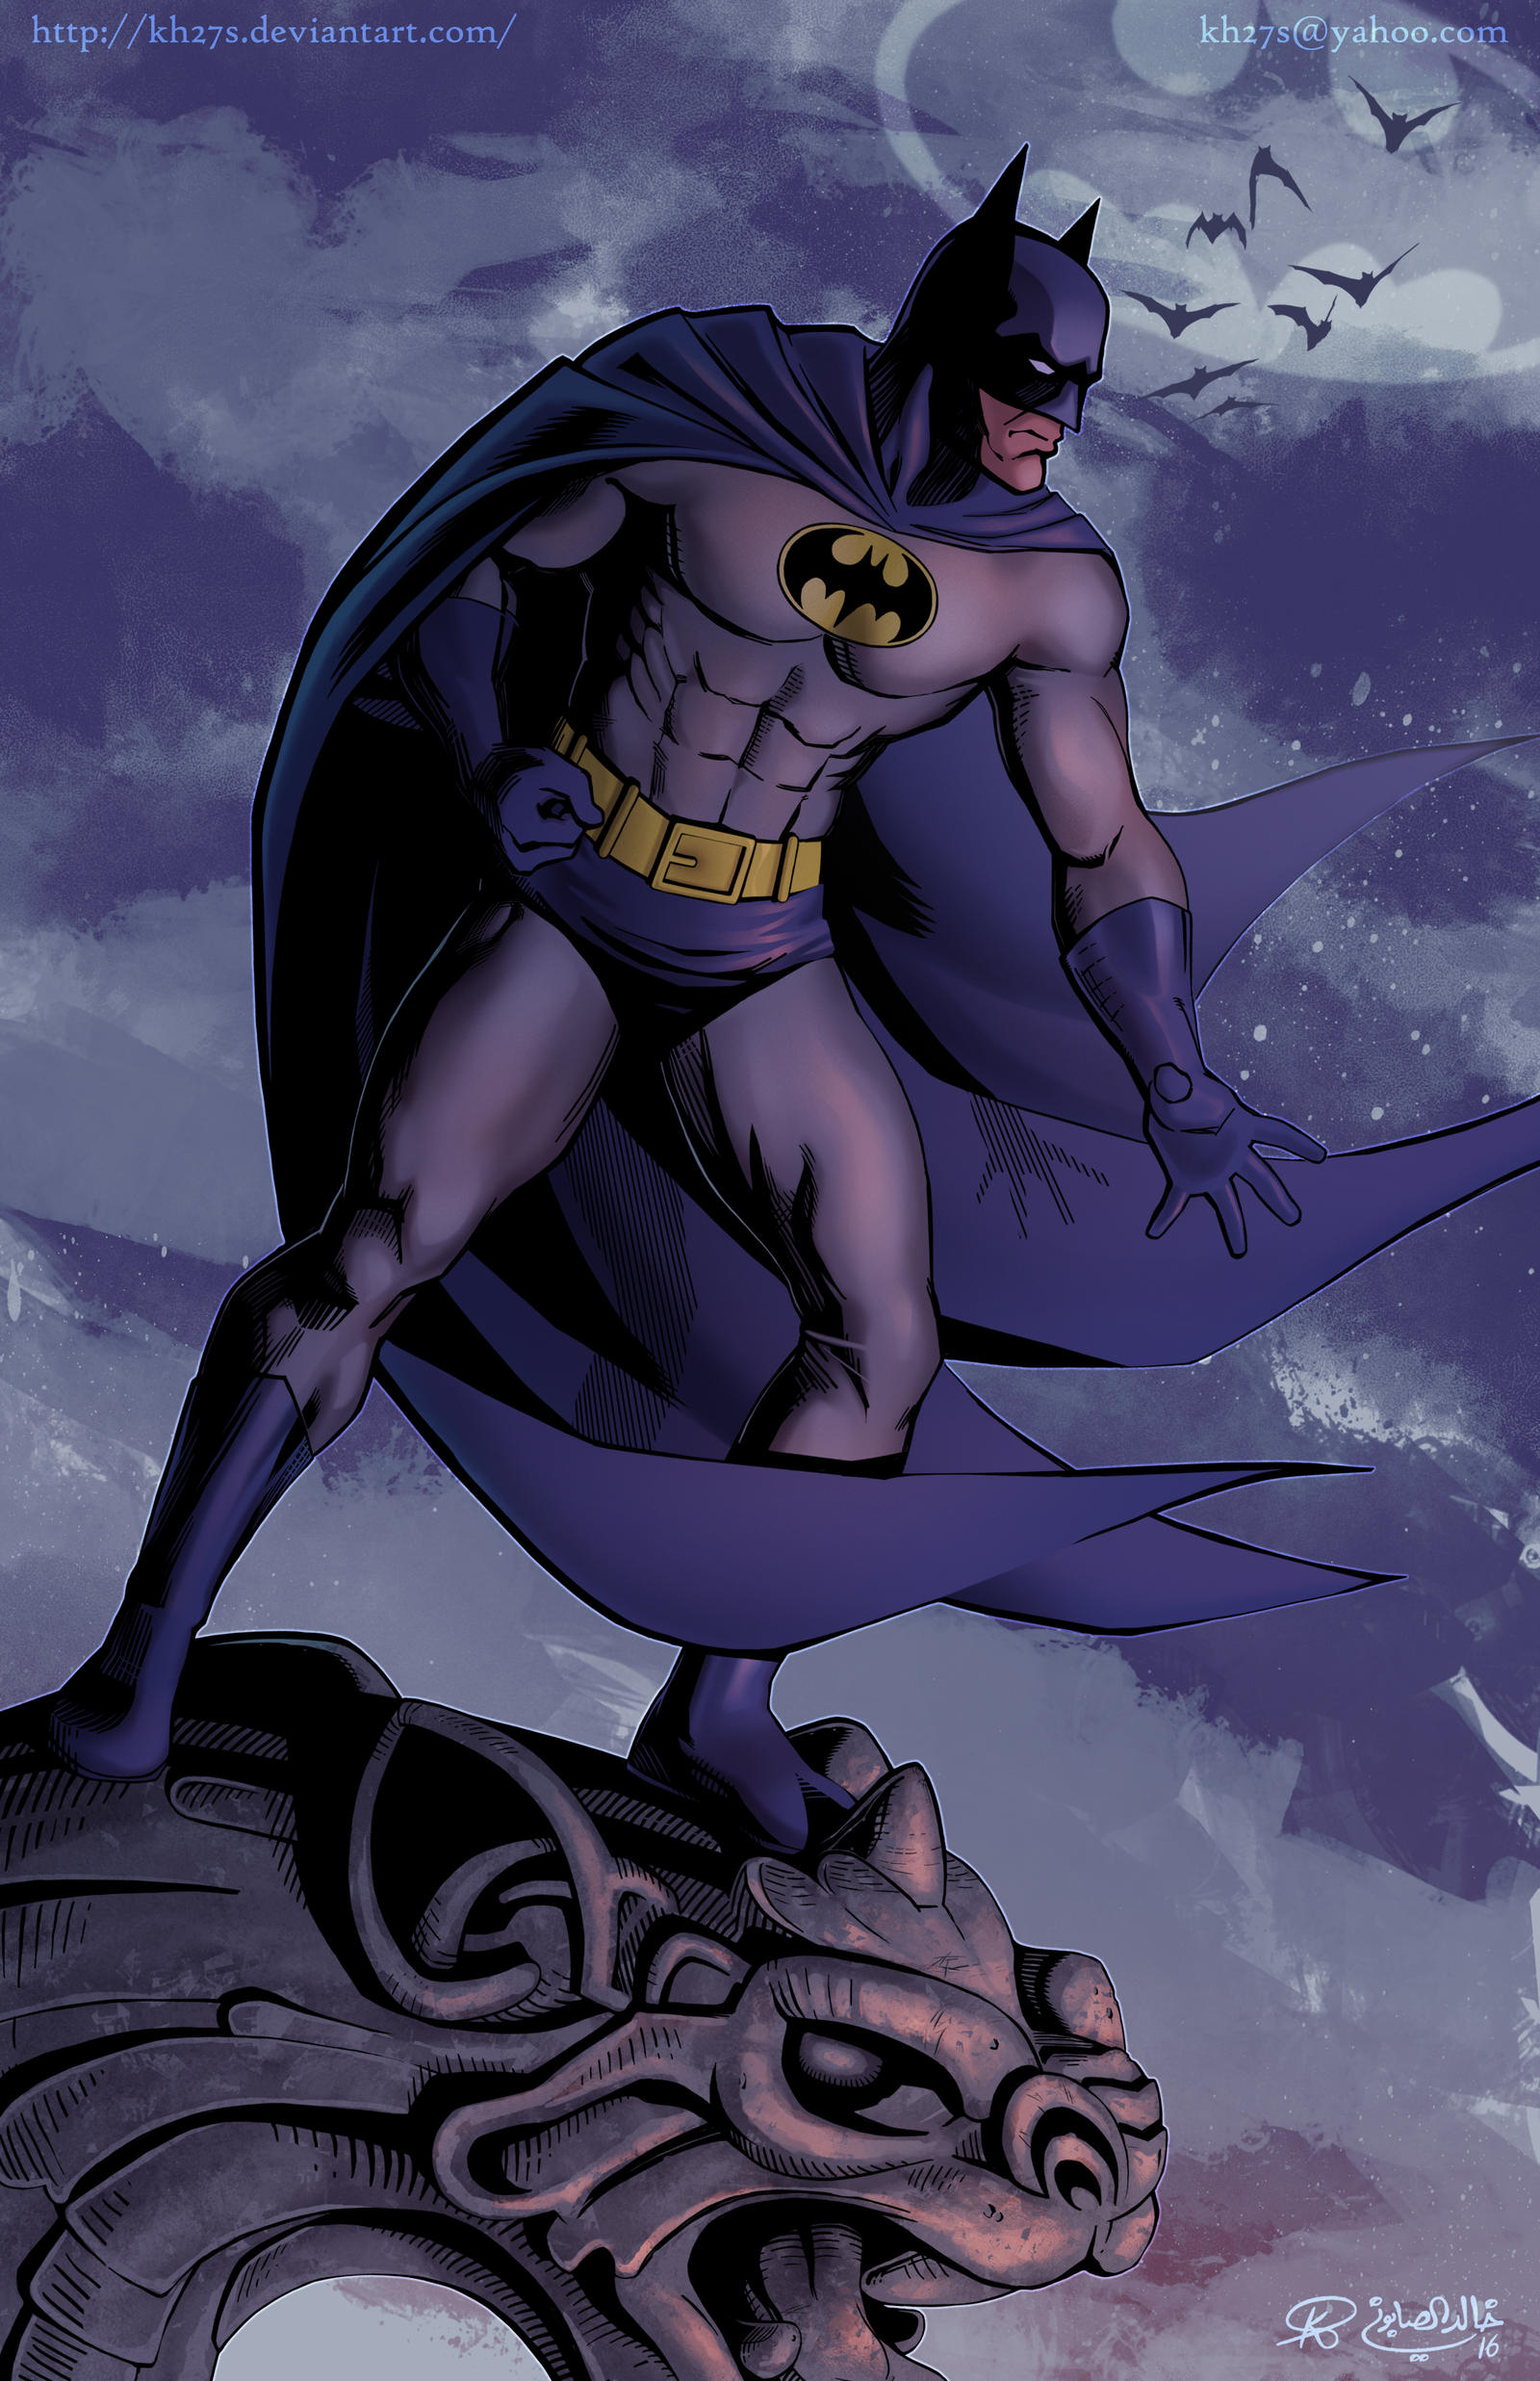 Let me crushed your body batman by david1864 on DeviantArt